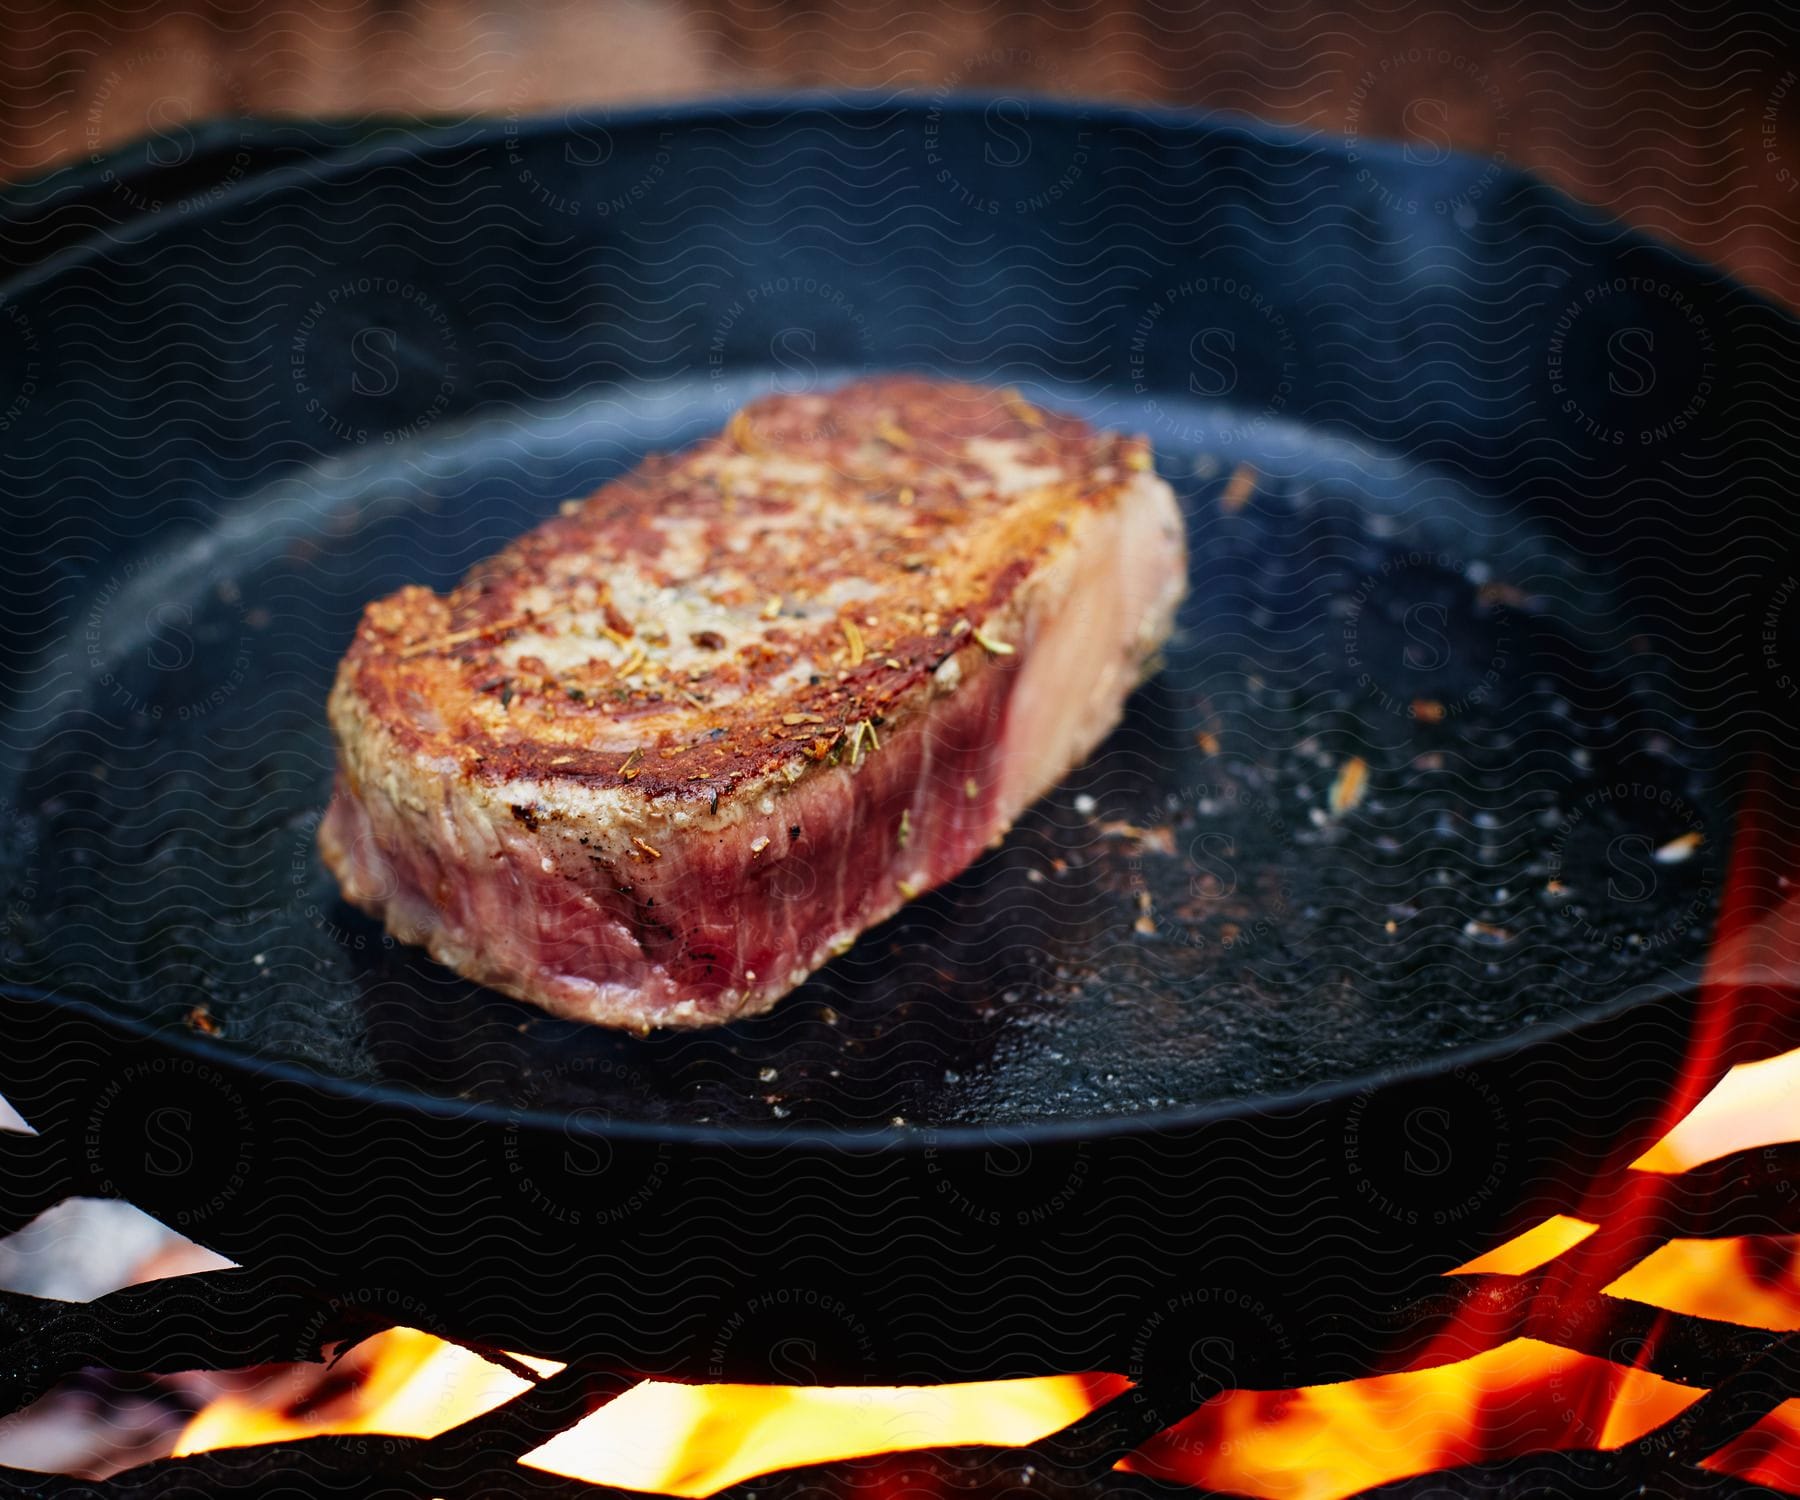 A juicy steak sizzles in a cast iron skillet over a bed of hot coals.